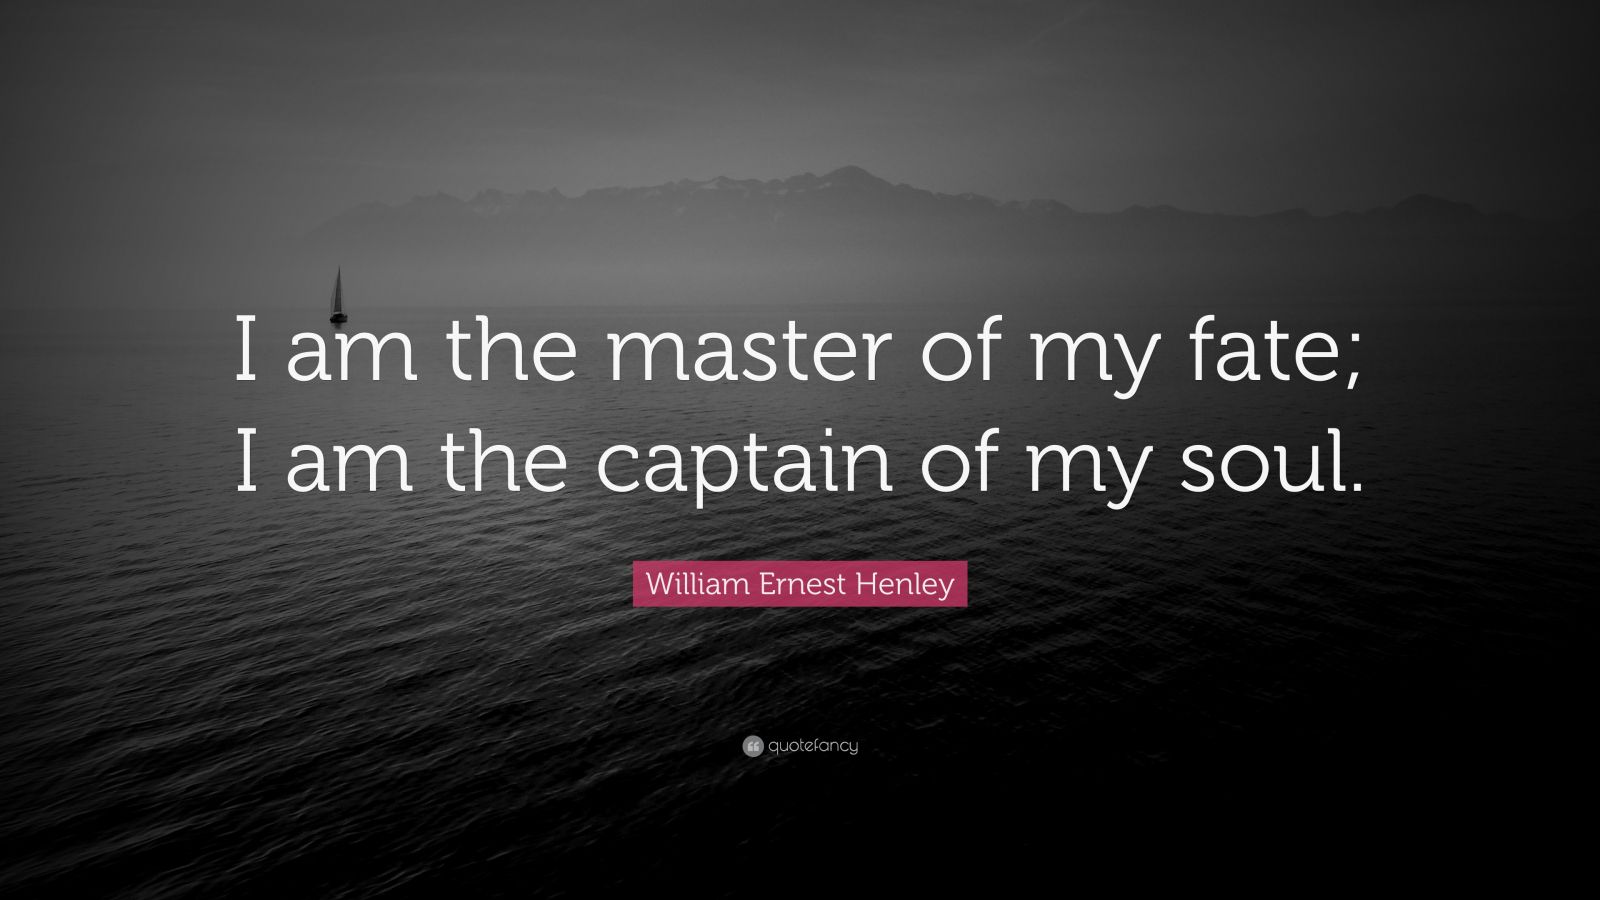 William Ernest Henley Quote: “I am the master of my fate; I am the